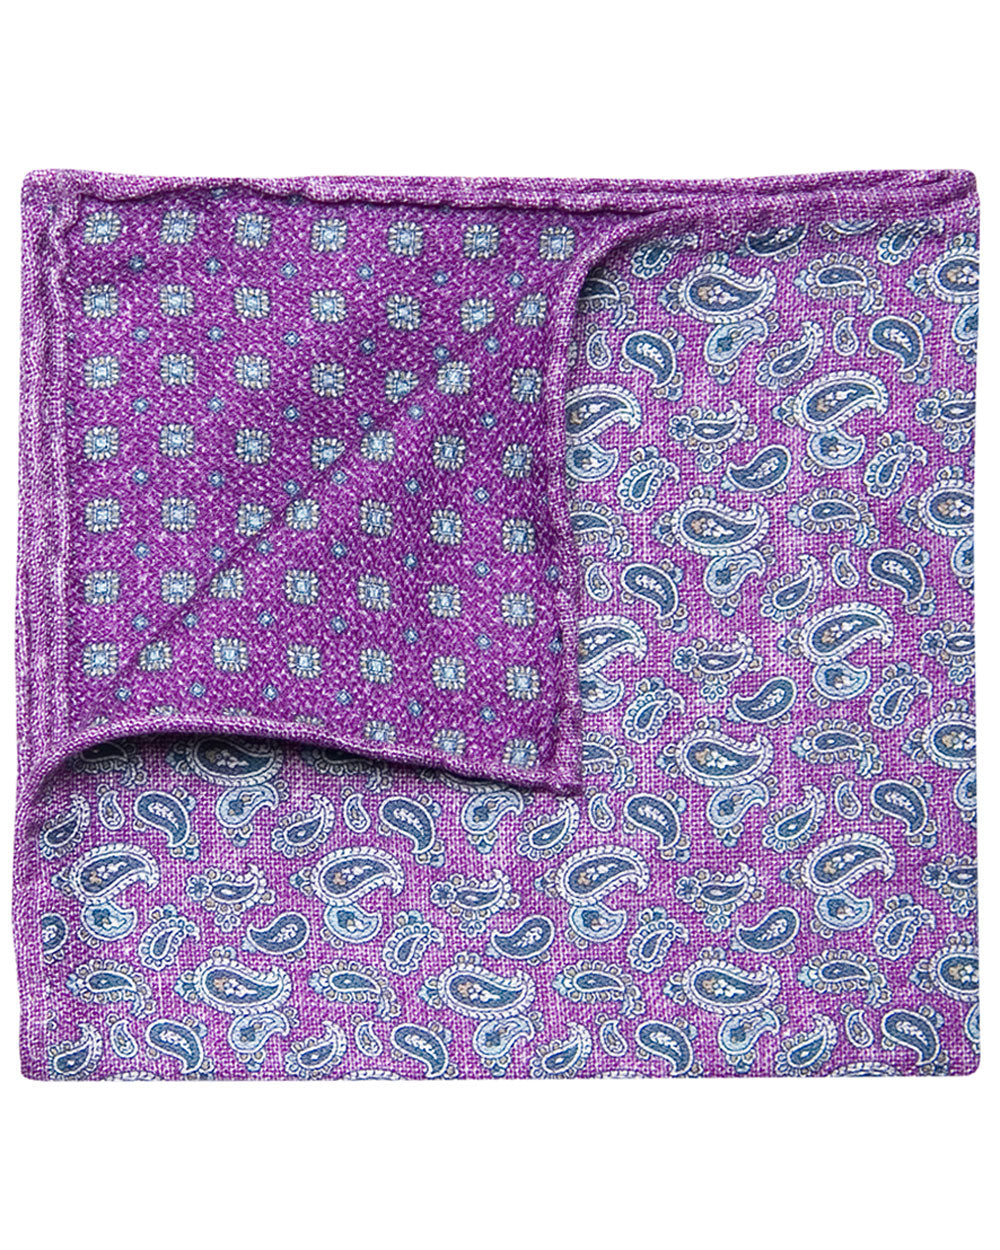 Pines Pocket Square in Orchid